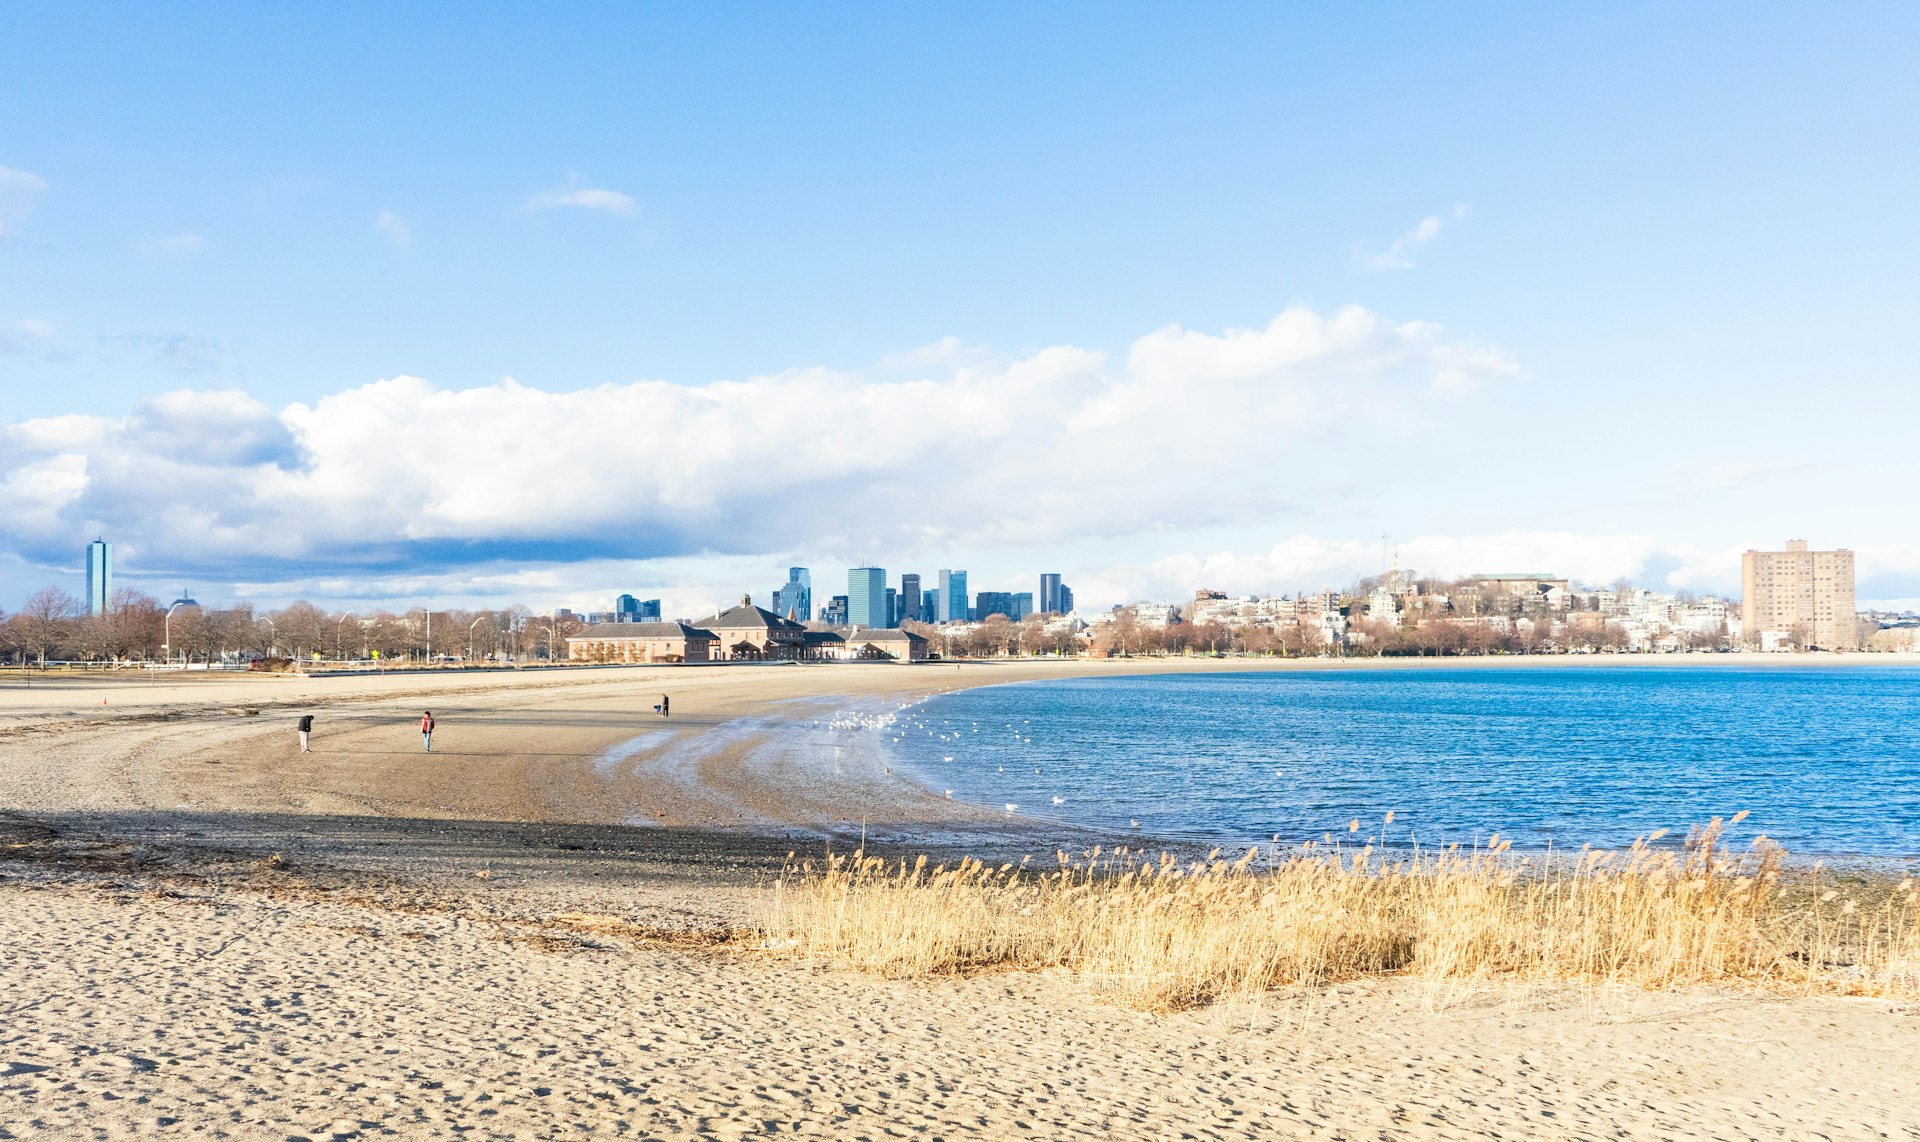 A sandy beach cove with a city skyline in the distance